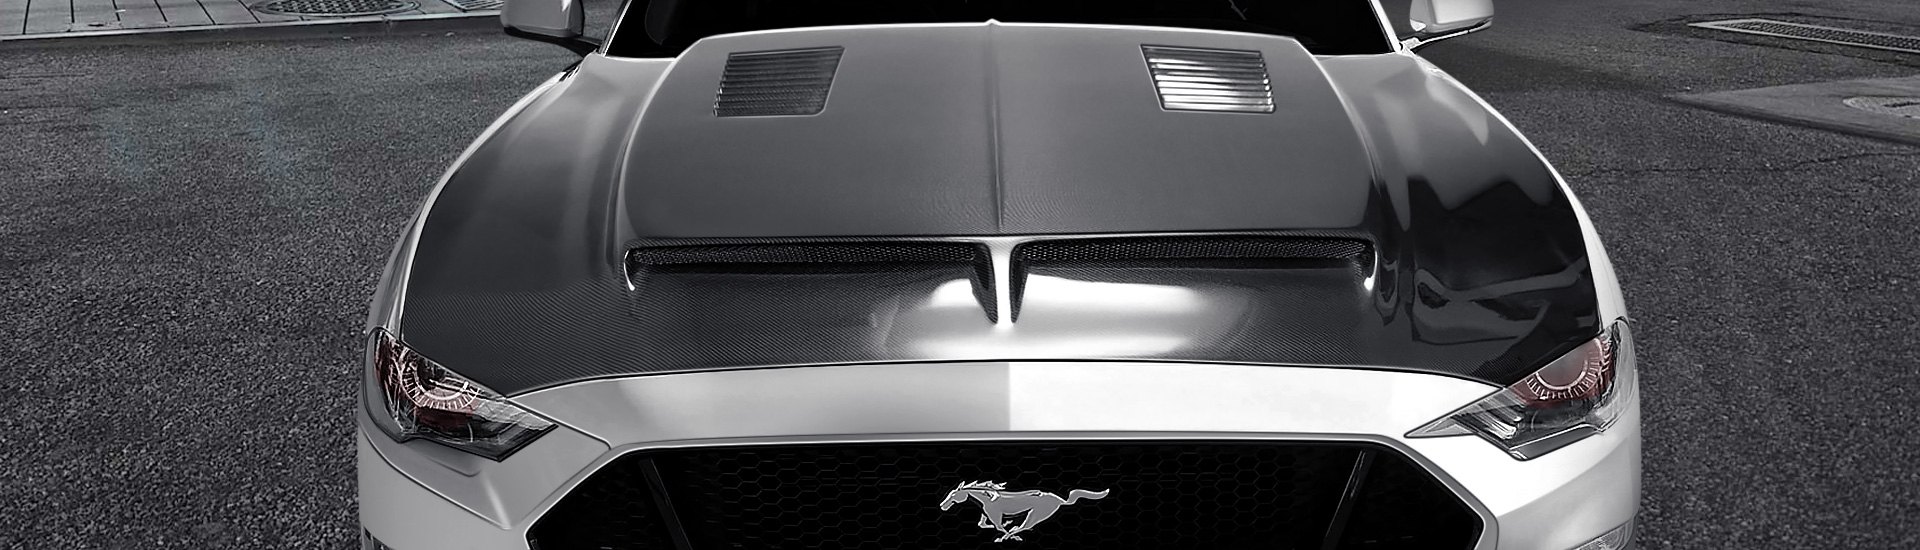 GT500 Style Carbon Fiber Hood by Carbon Creations for 2018 and Up Ford Mustang